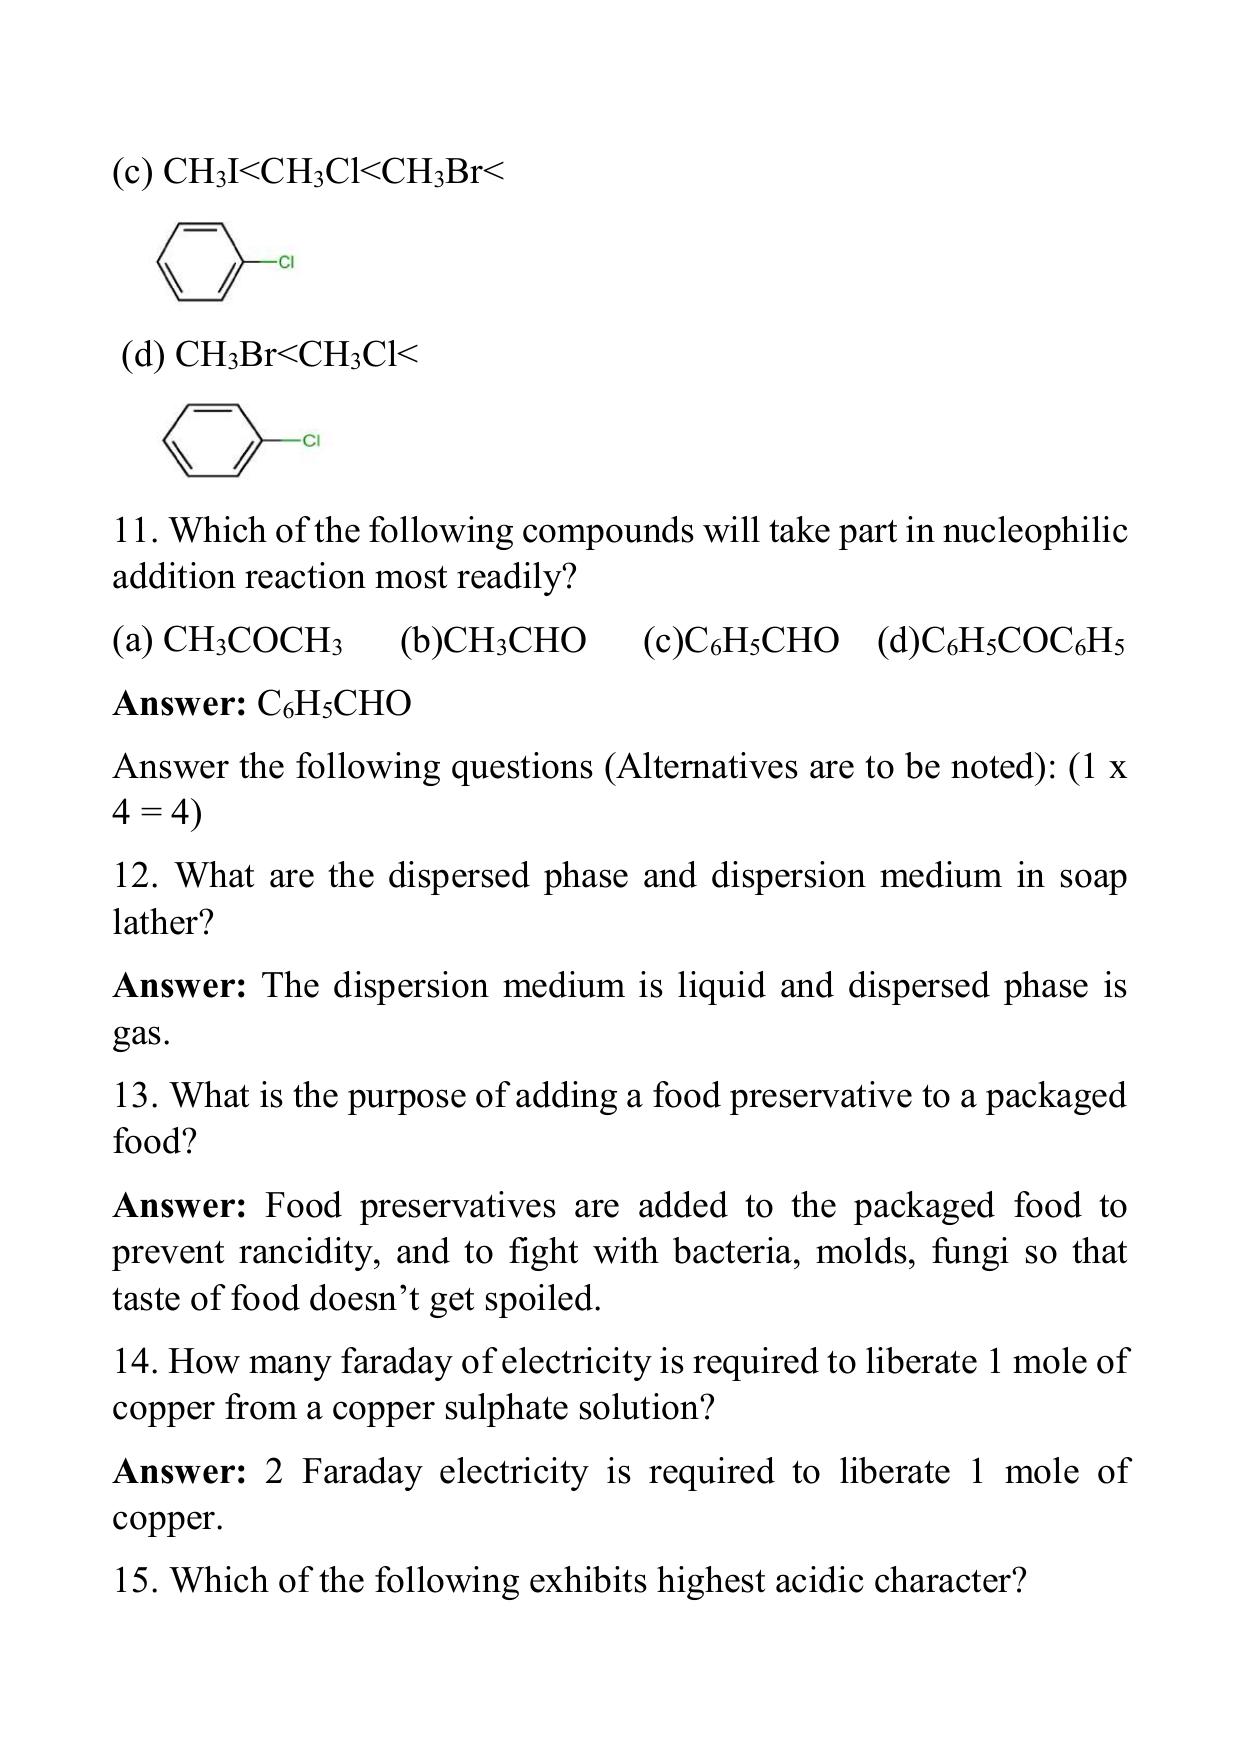 West Bengal Board Class 12 Chemistry 2018 Question Paper - Page 18